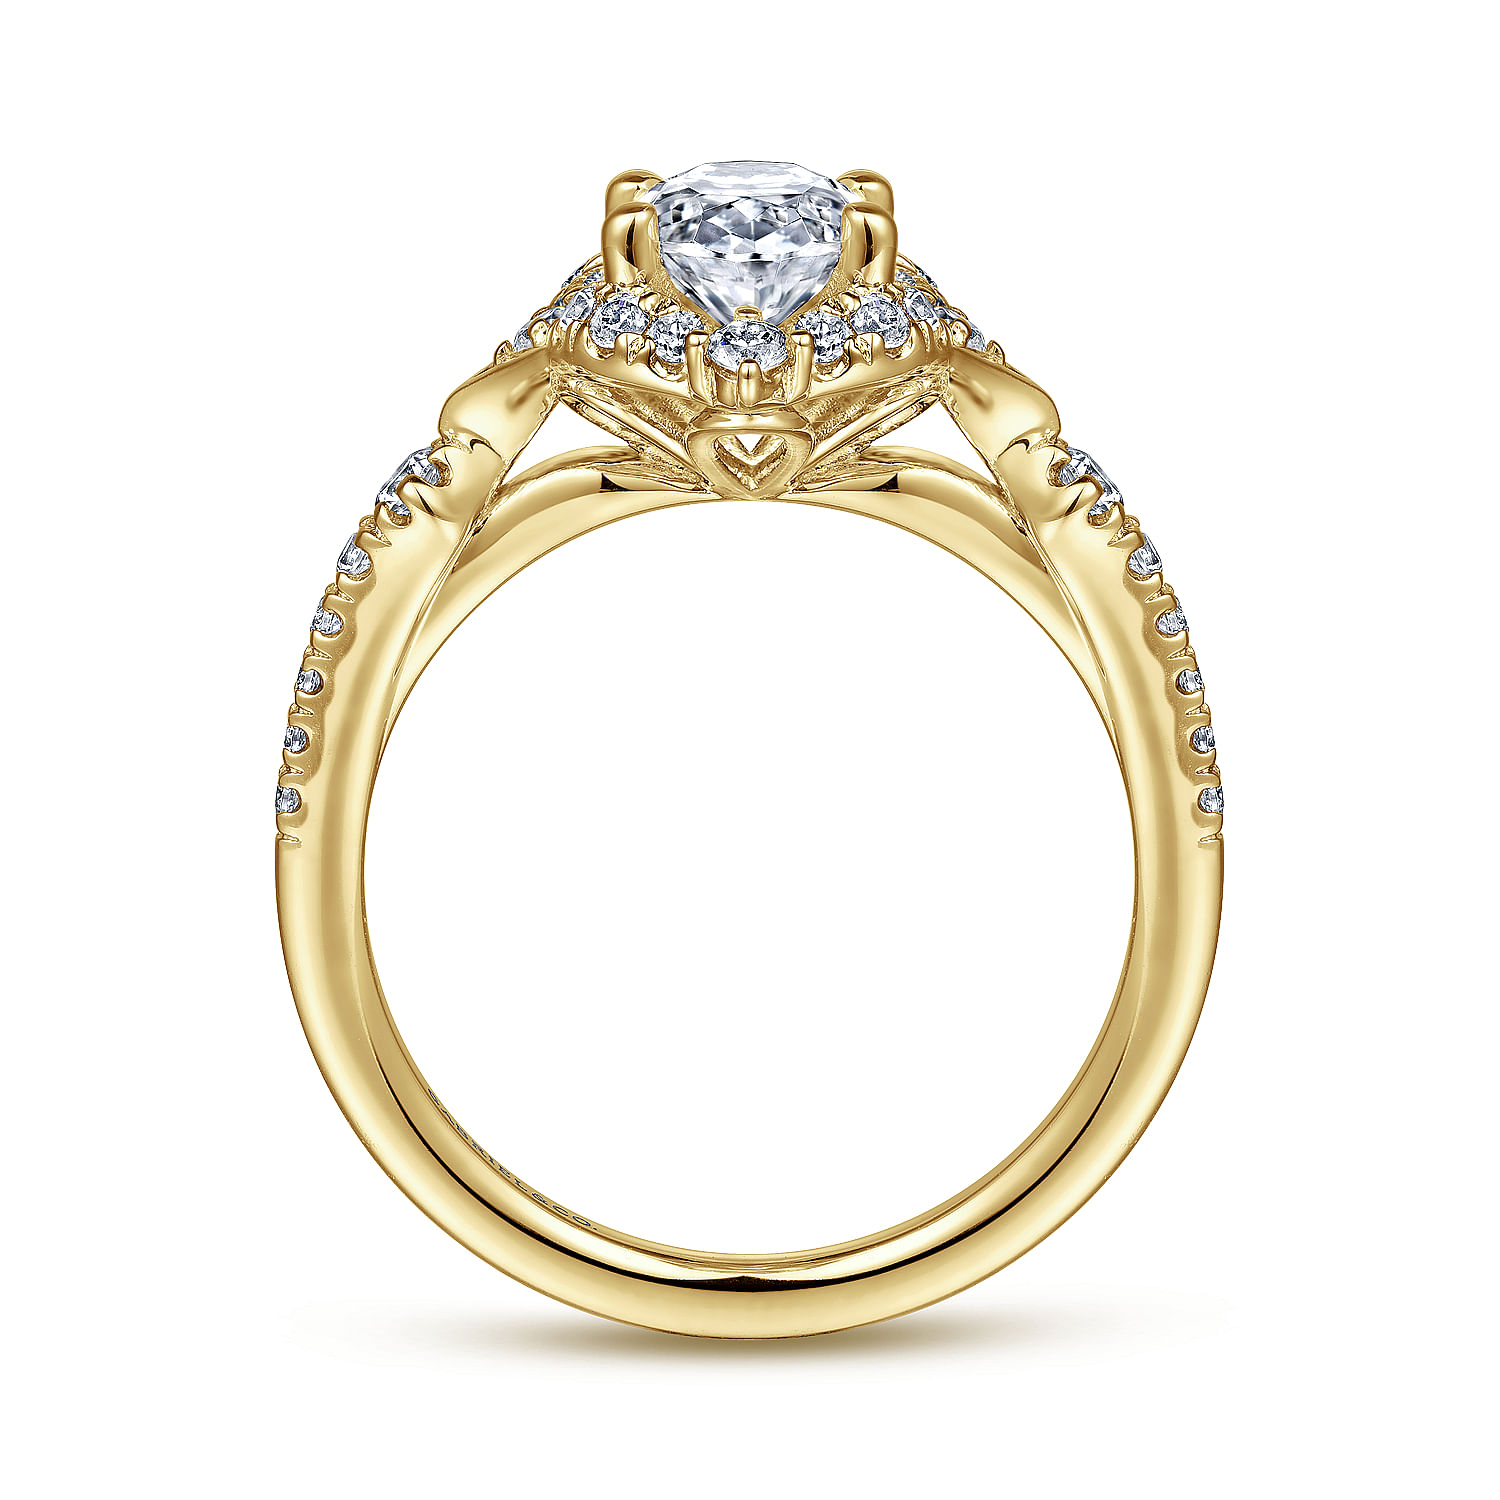 Vintage Inspired 14K Yellow Gold Fancy Halo Oval Diamond Engagement Ring